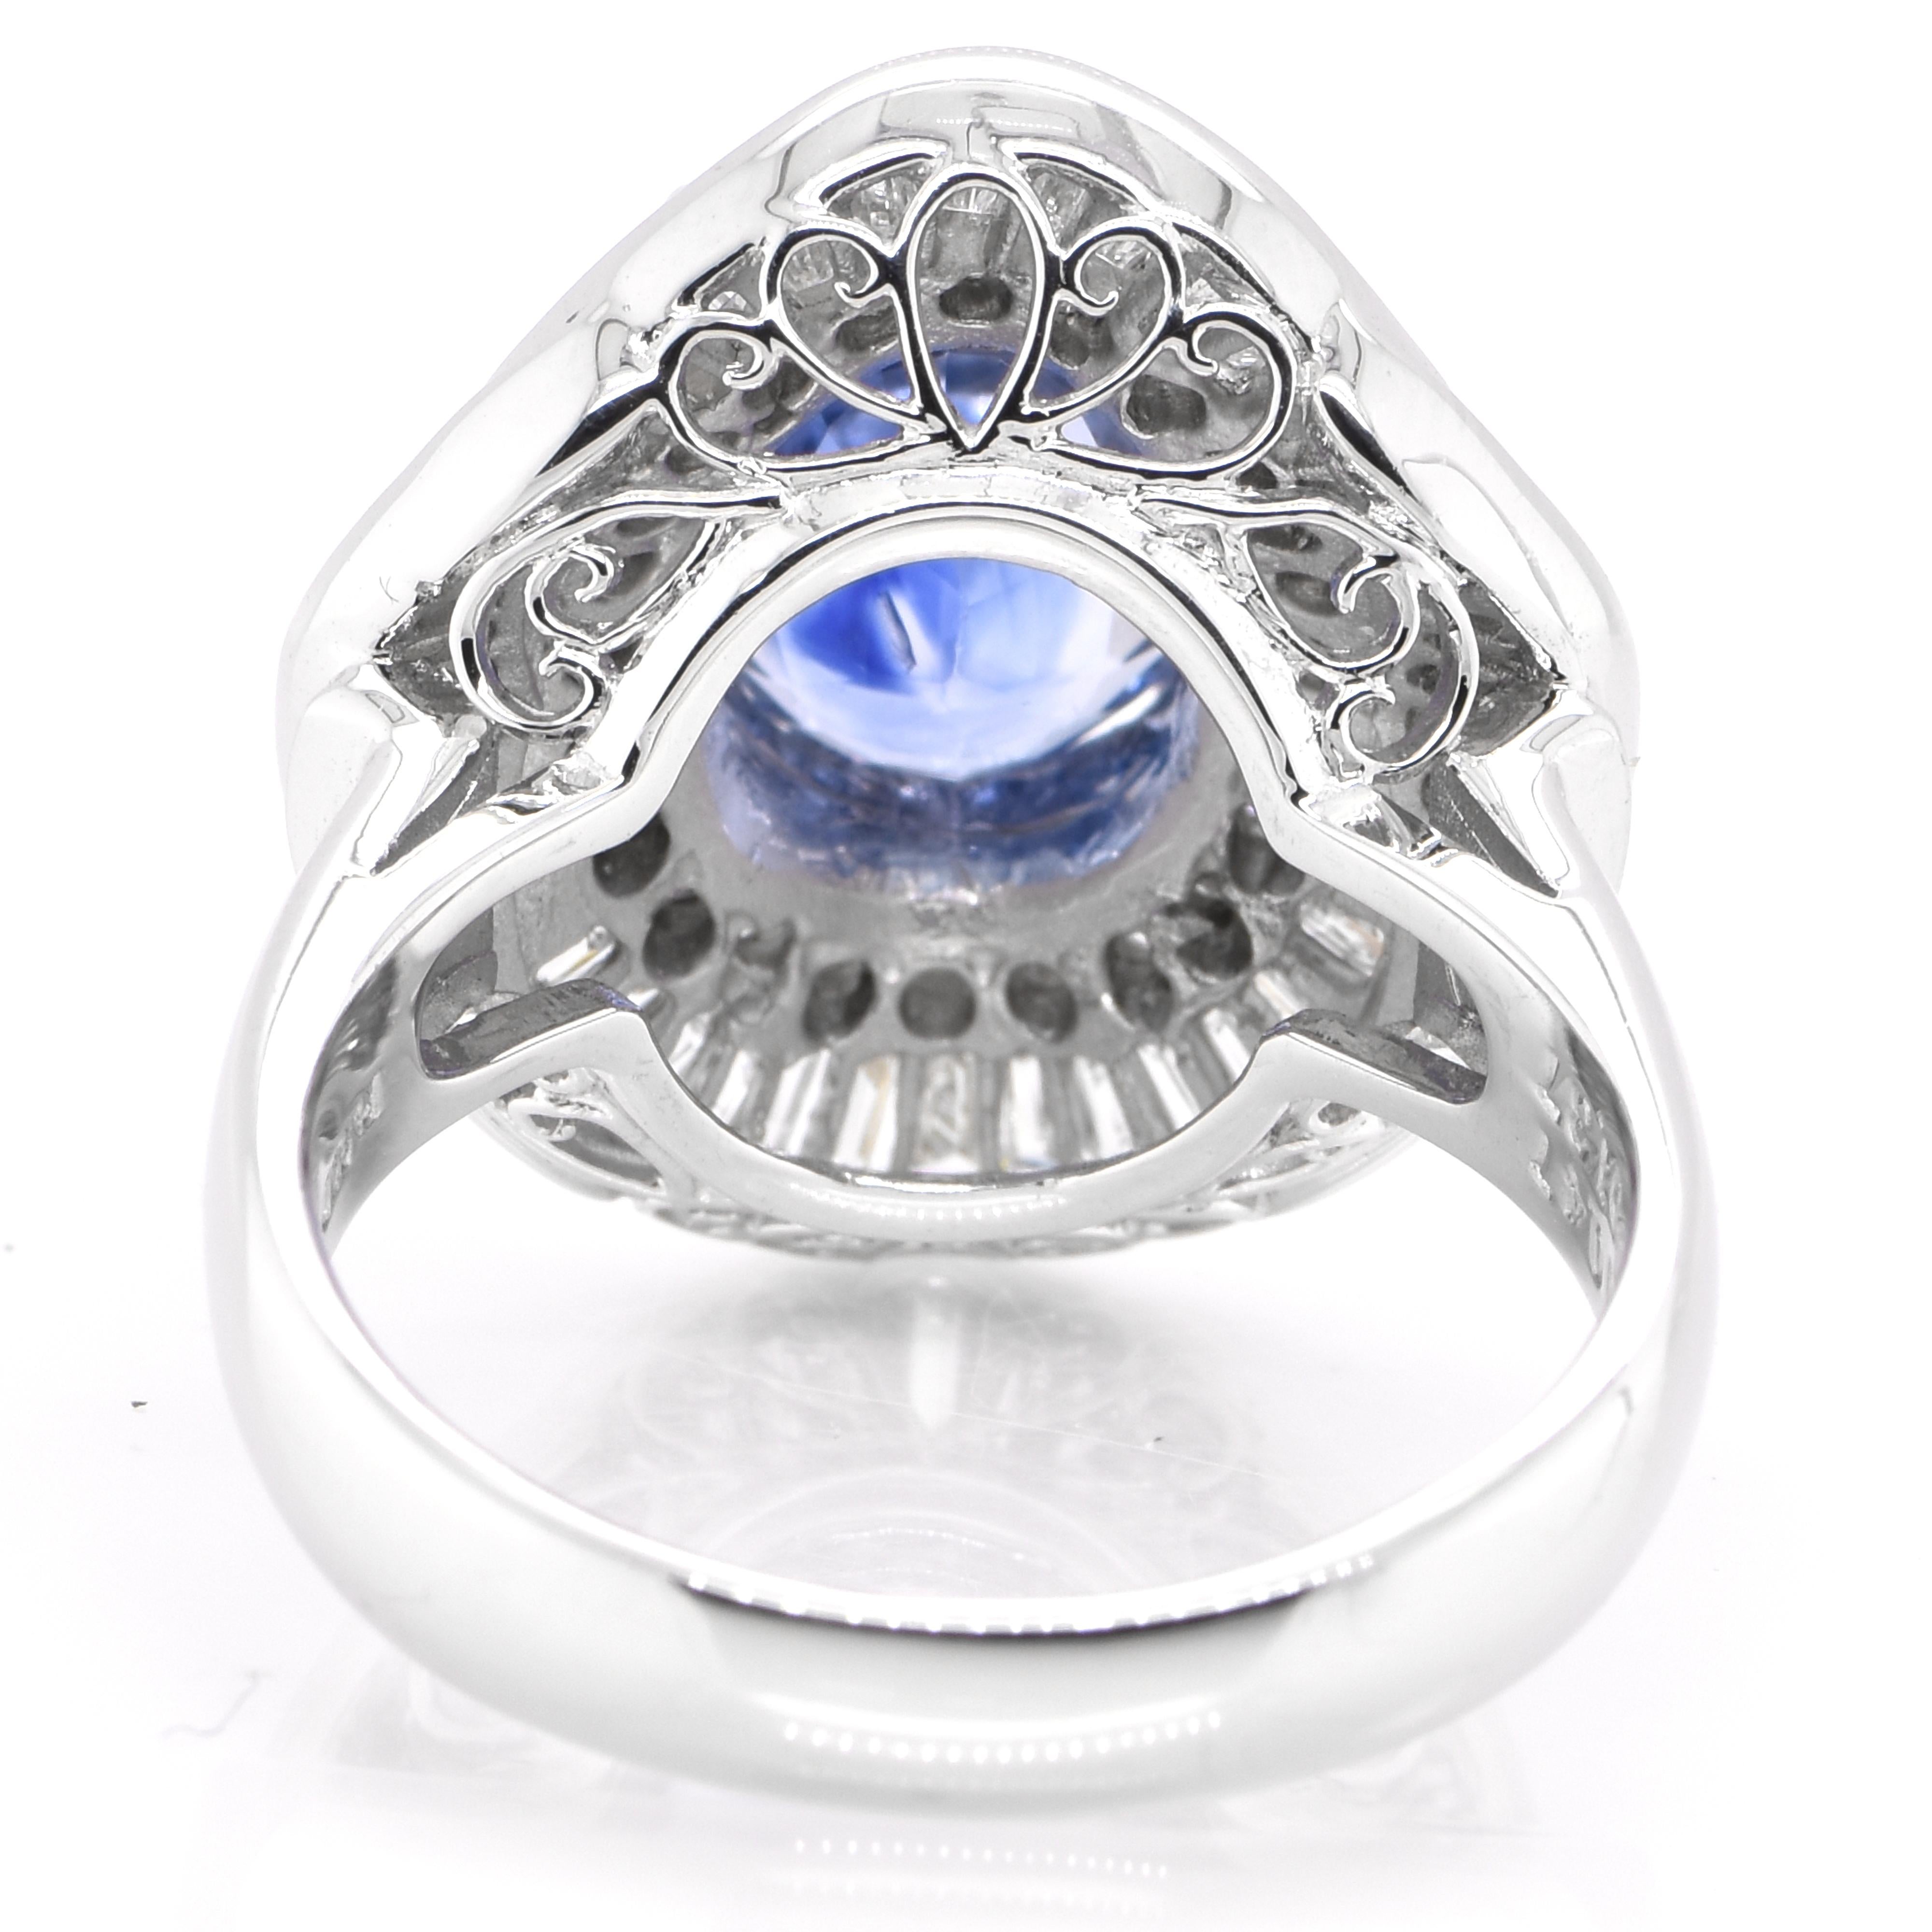 Women's 5.09 Carat Natural Blue Sapphire and Diamond Vintage Estate Ring Set in Platinum For Sale